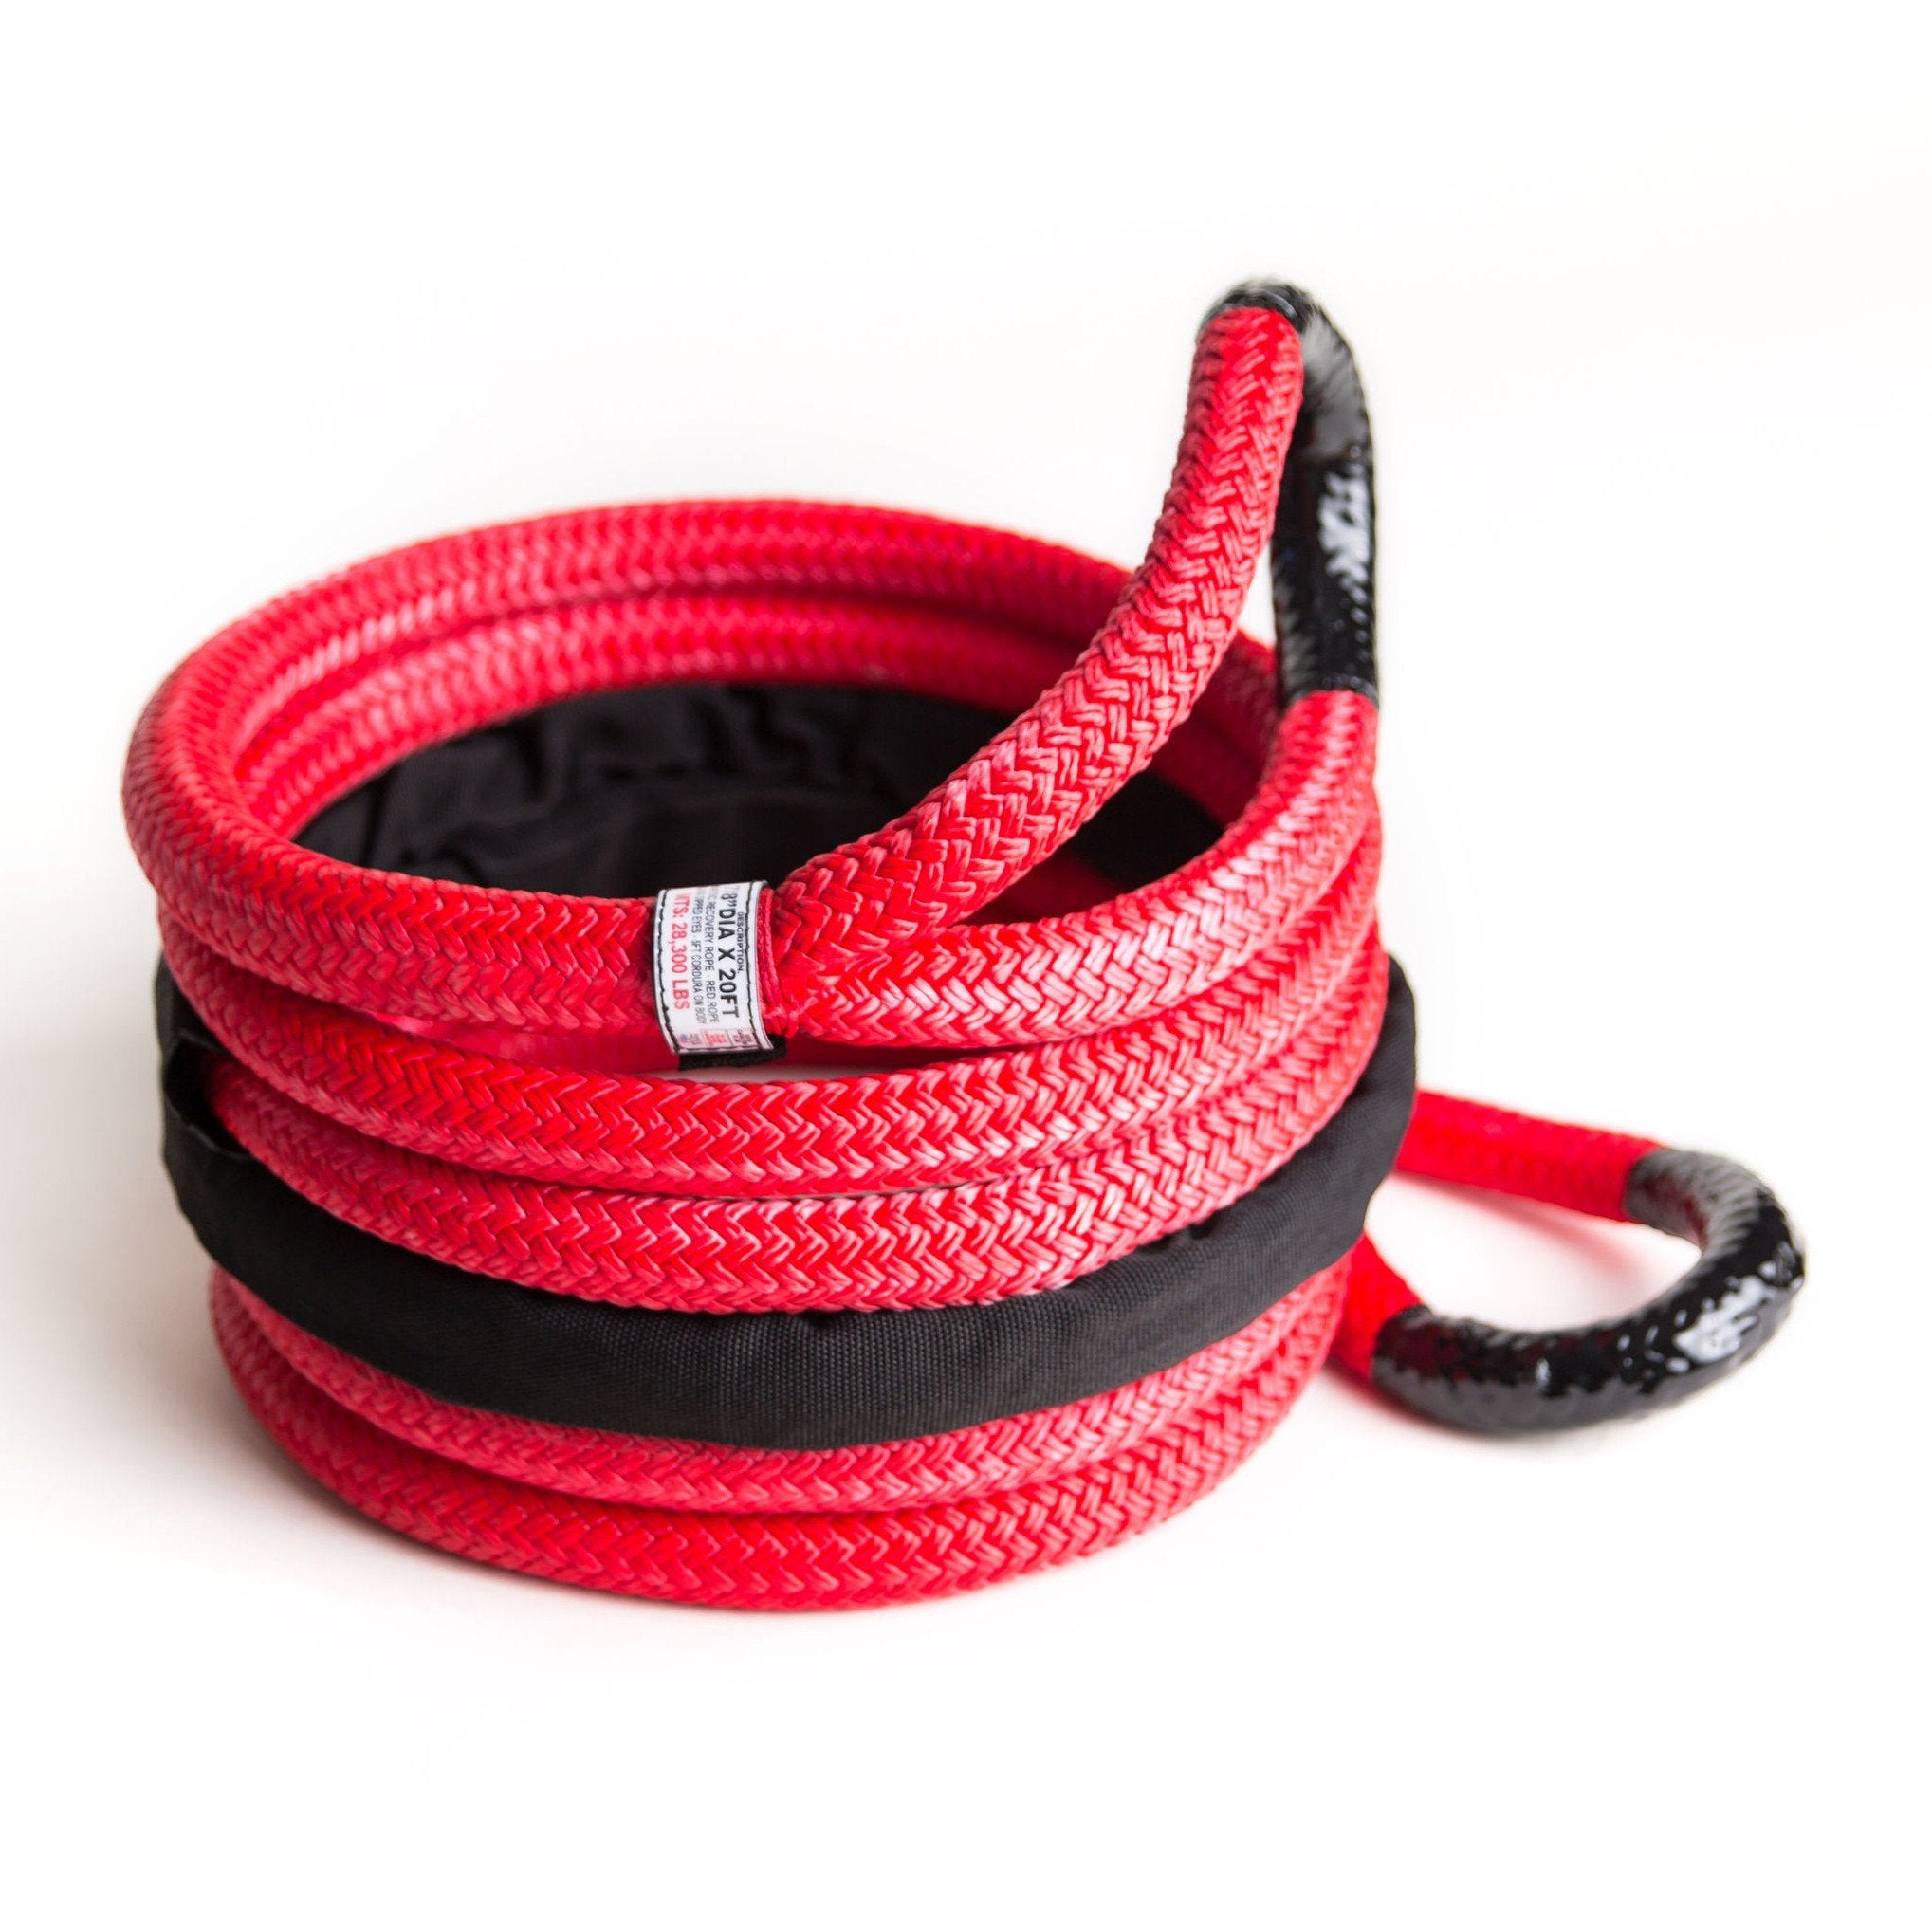 Yankum Ropes - 7/8" Kinetic Recovery Rope "Python" [ WLL 5,700-9,000 lbs] [MBS 28,600 lbs]